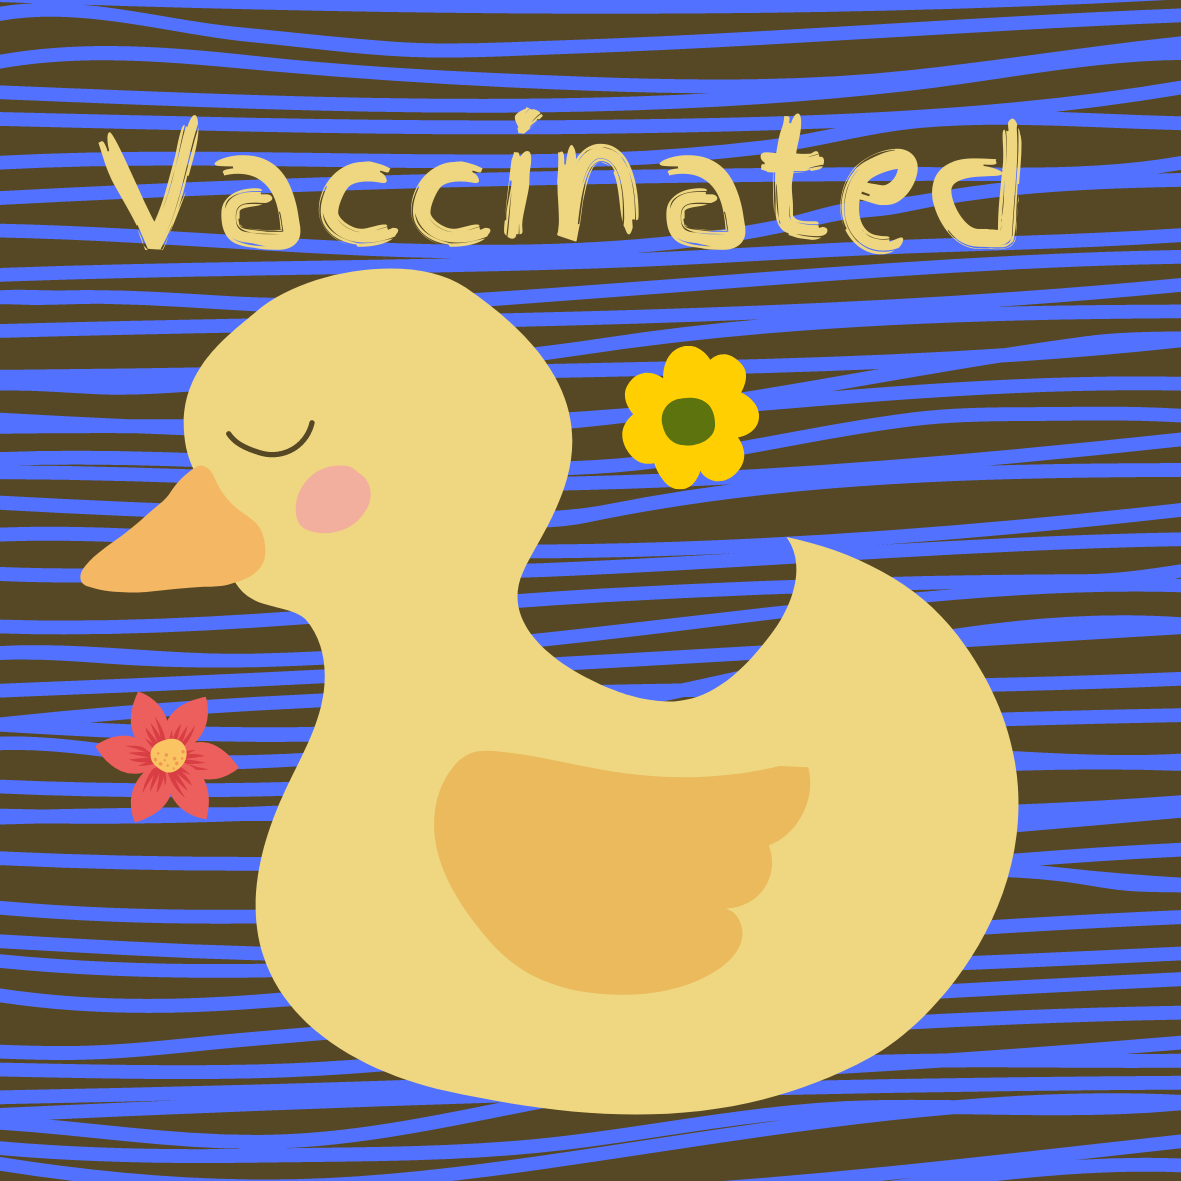 Vaccinated Baby Duck with Blue lines Circle Button/Pin